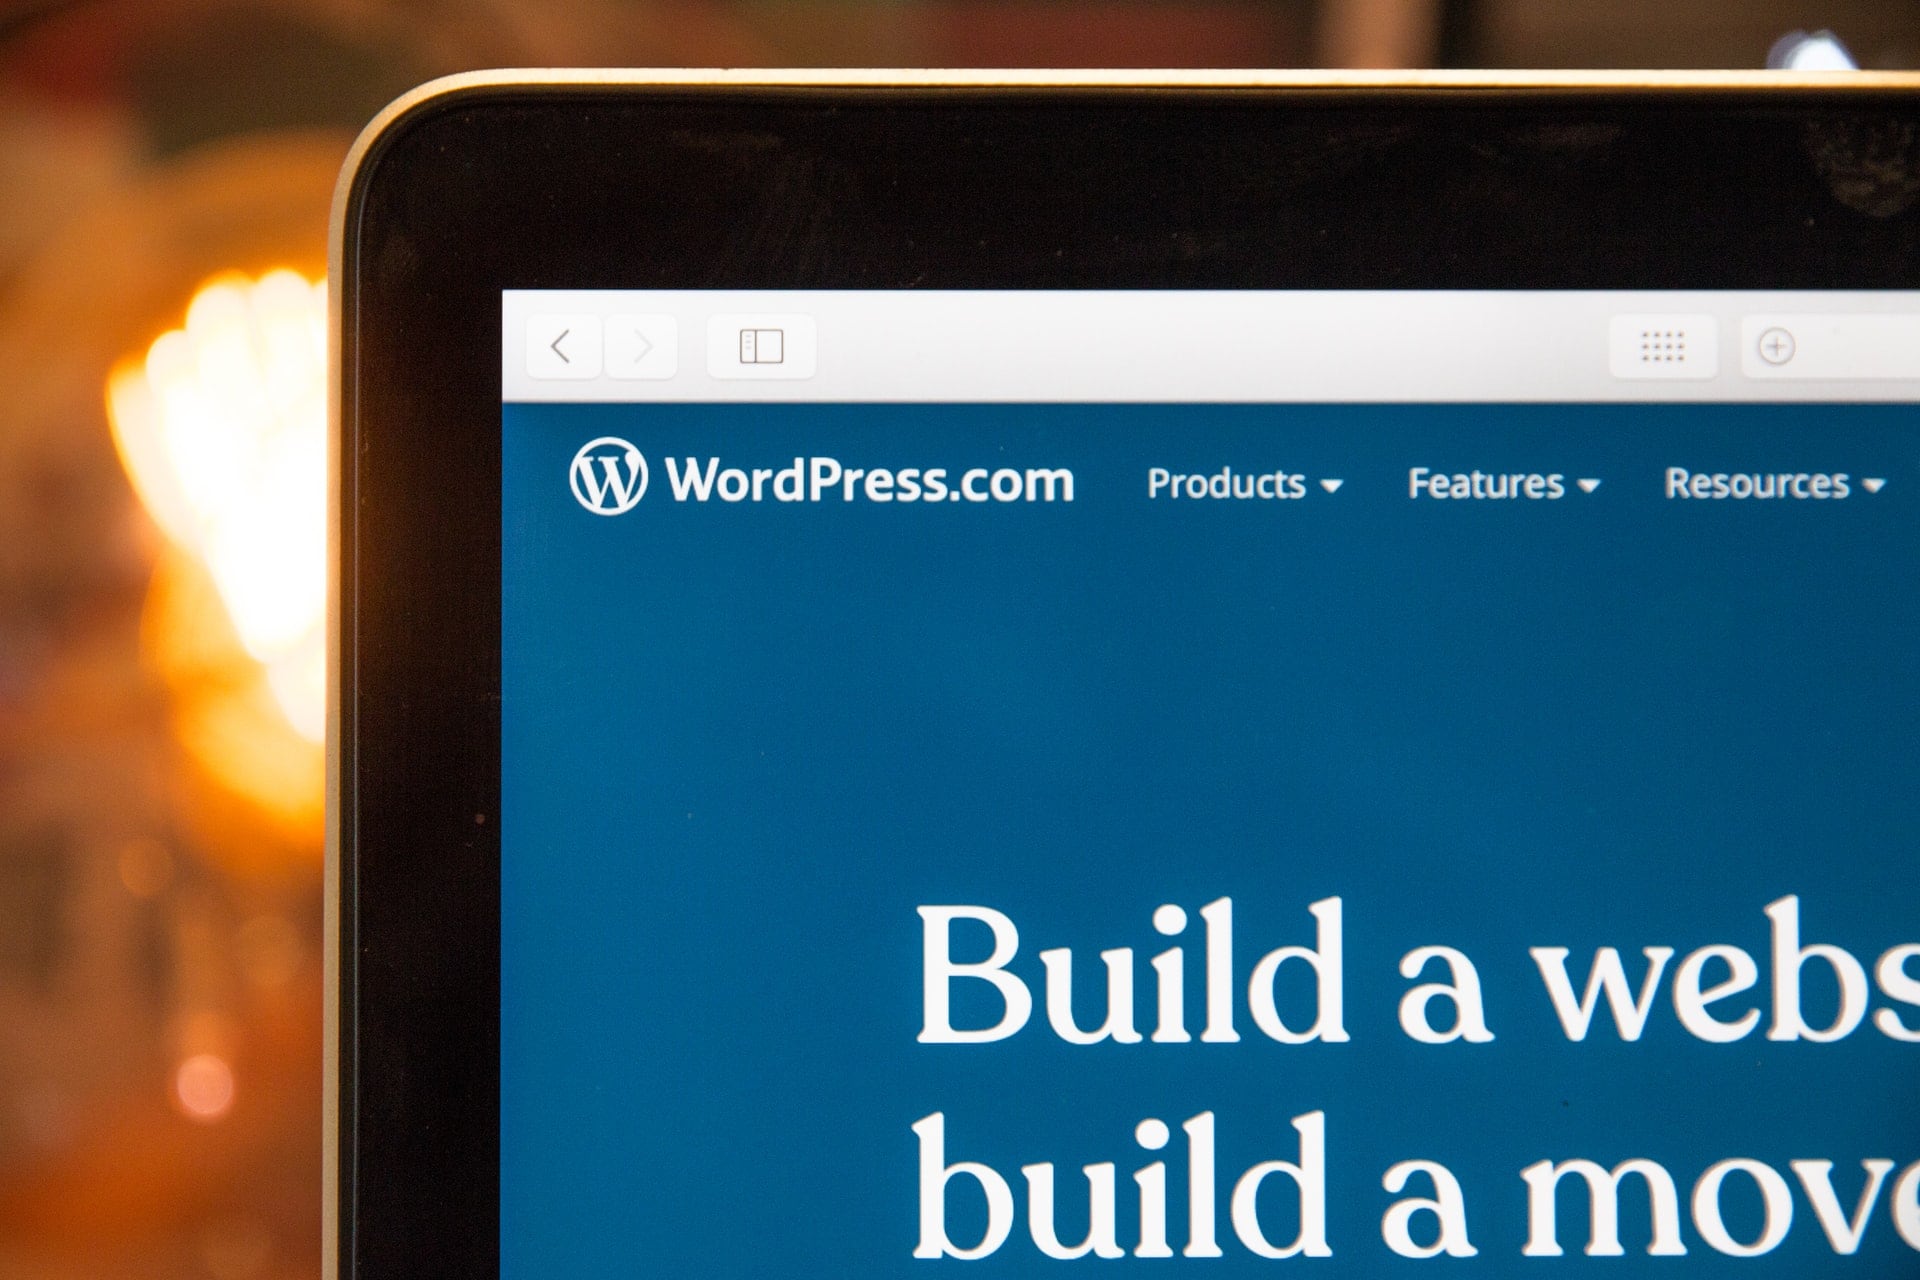 WordPress positioning – what does it consist in?